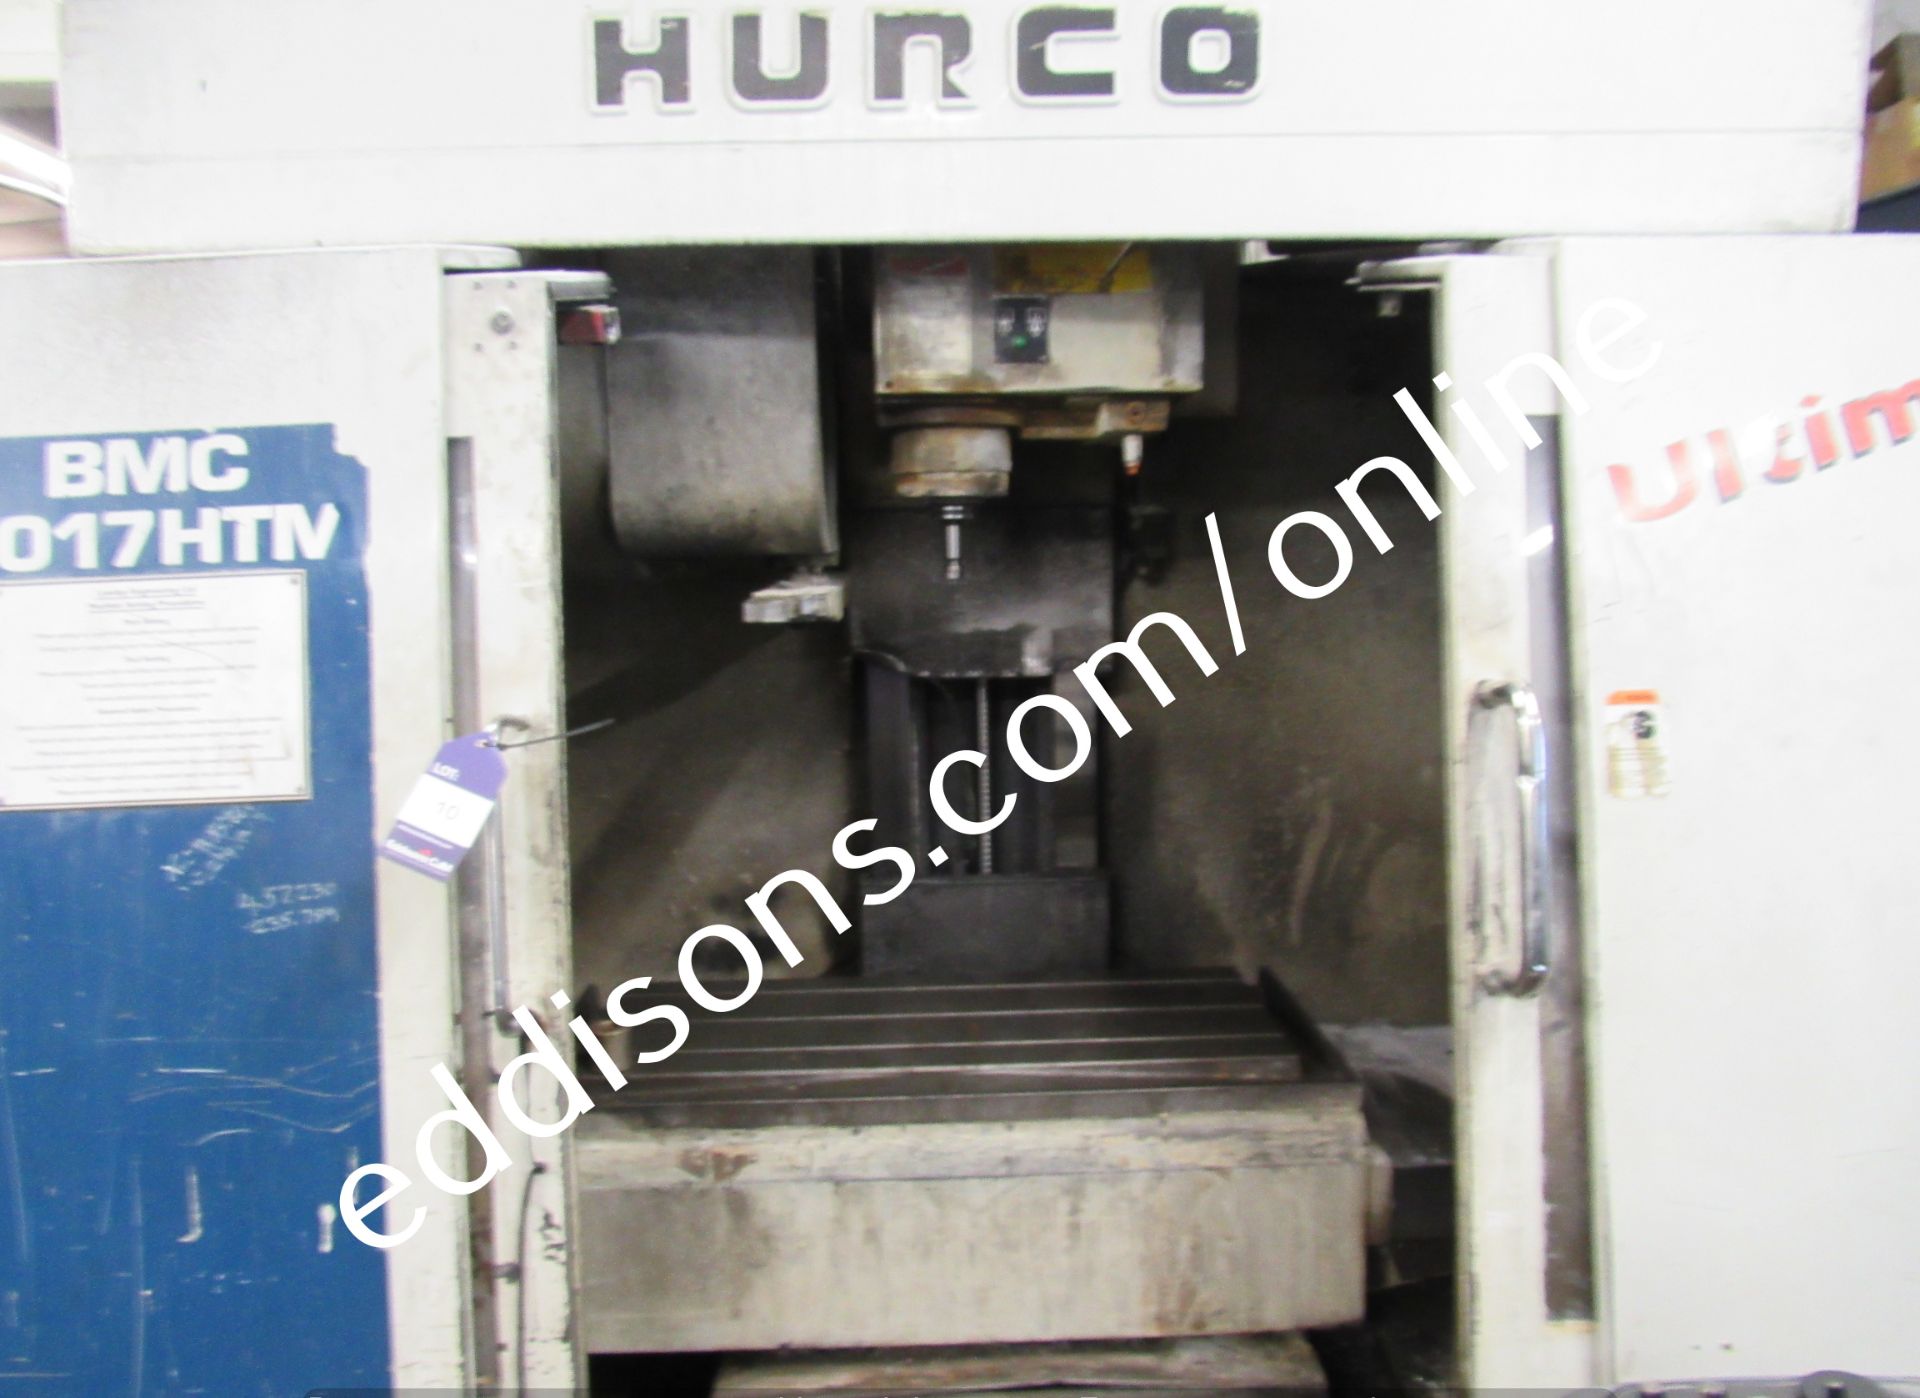 Hurco Ultimax BMC 3017HTM (762mm x 460mm bed limit - Image 3 of 11